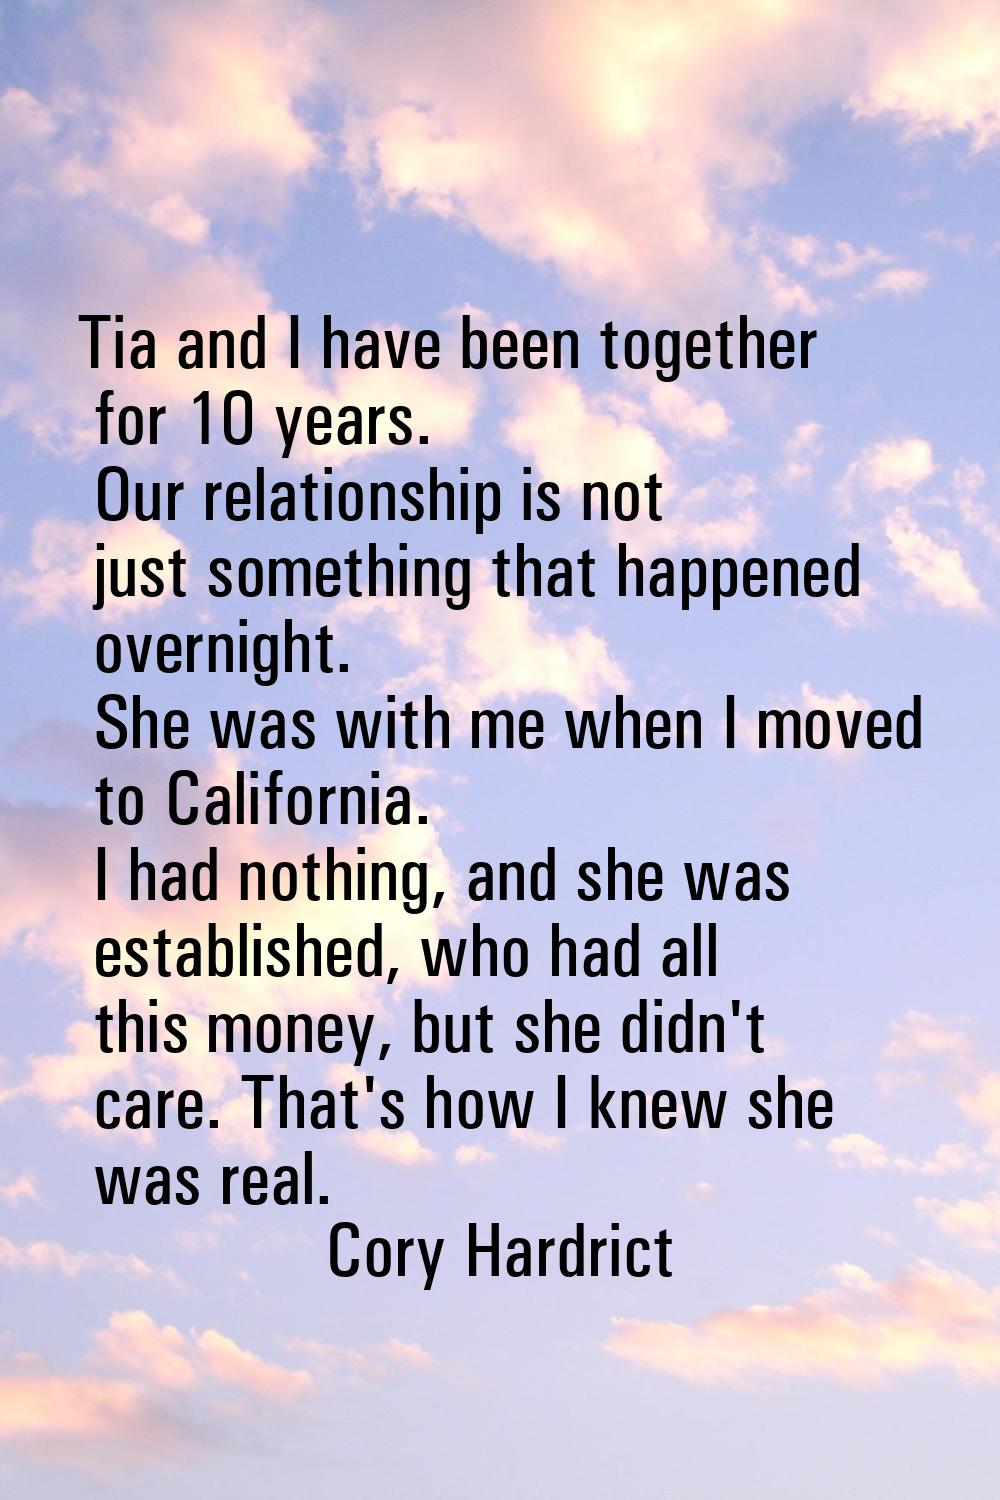 Tia and I have been together for 10 years. Our relationship is not just something that happened ove